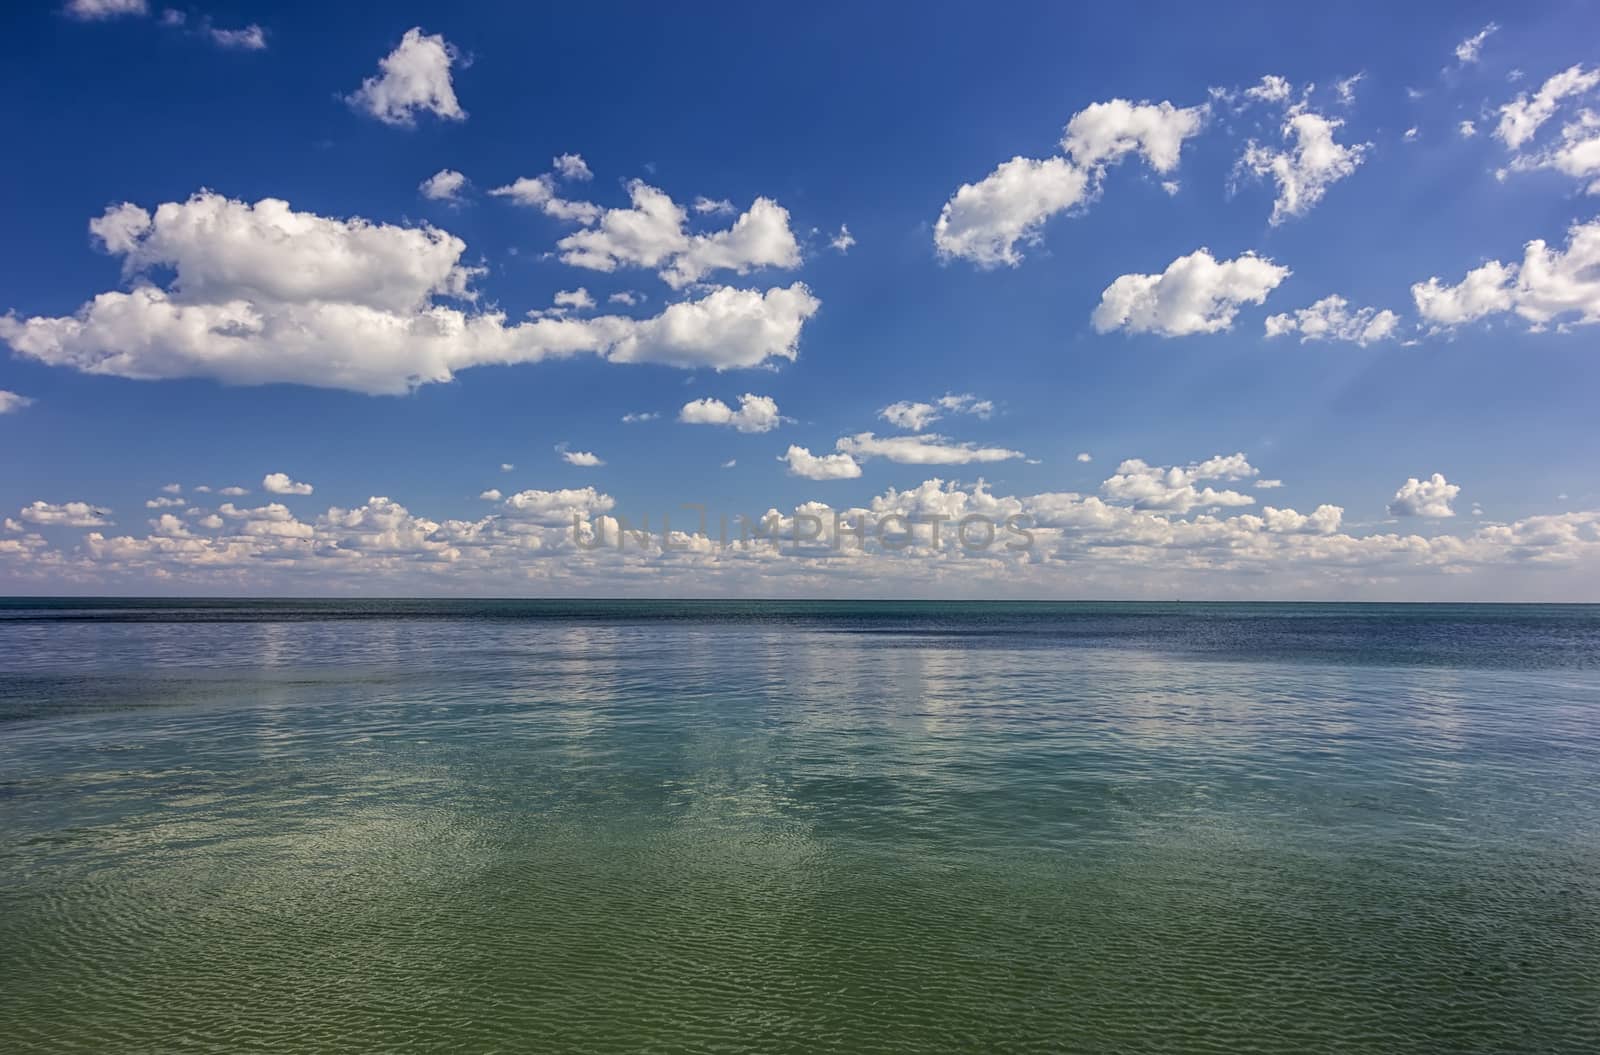 Amazing day calm sea view with clouds reflection